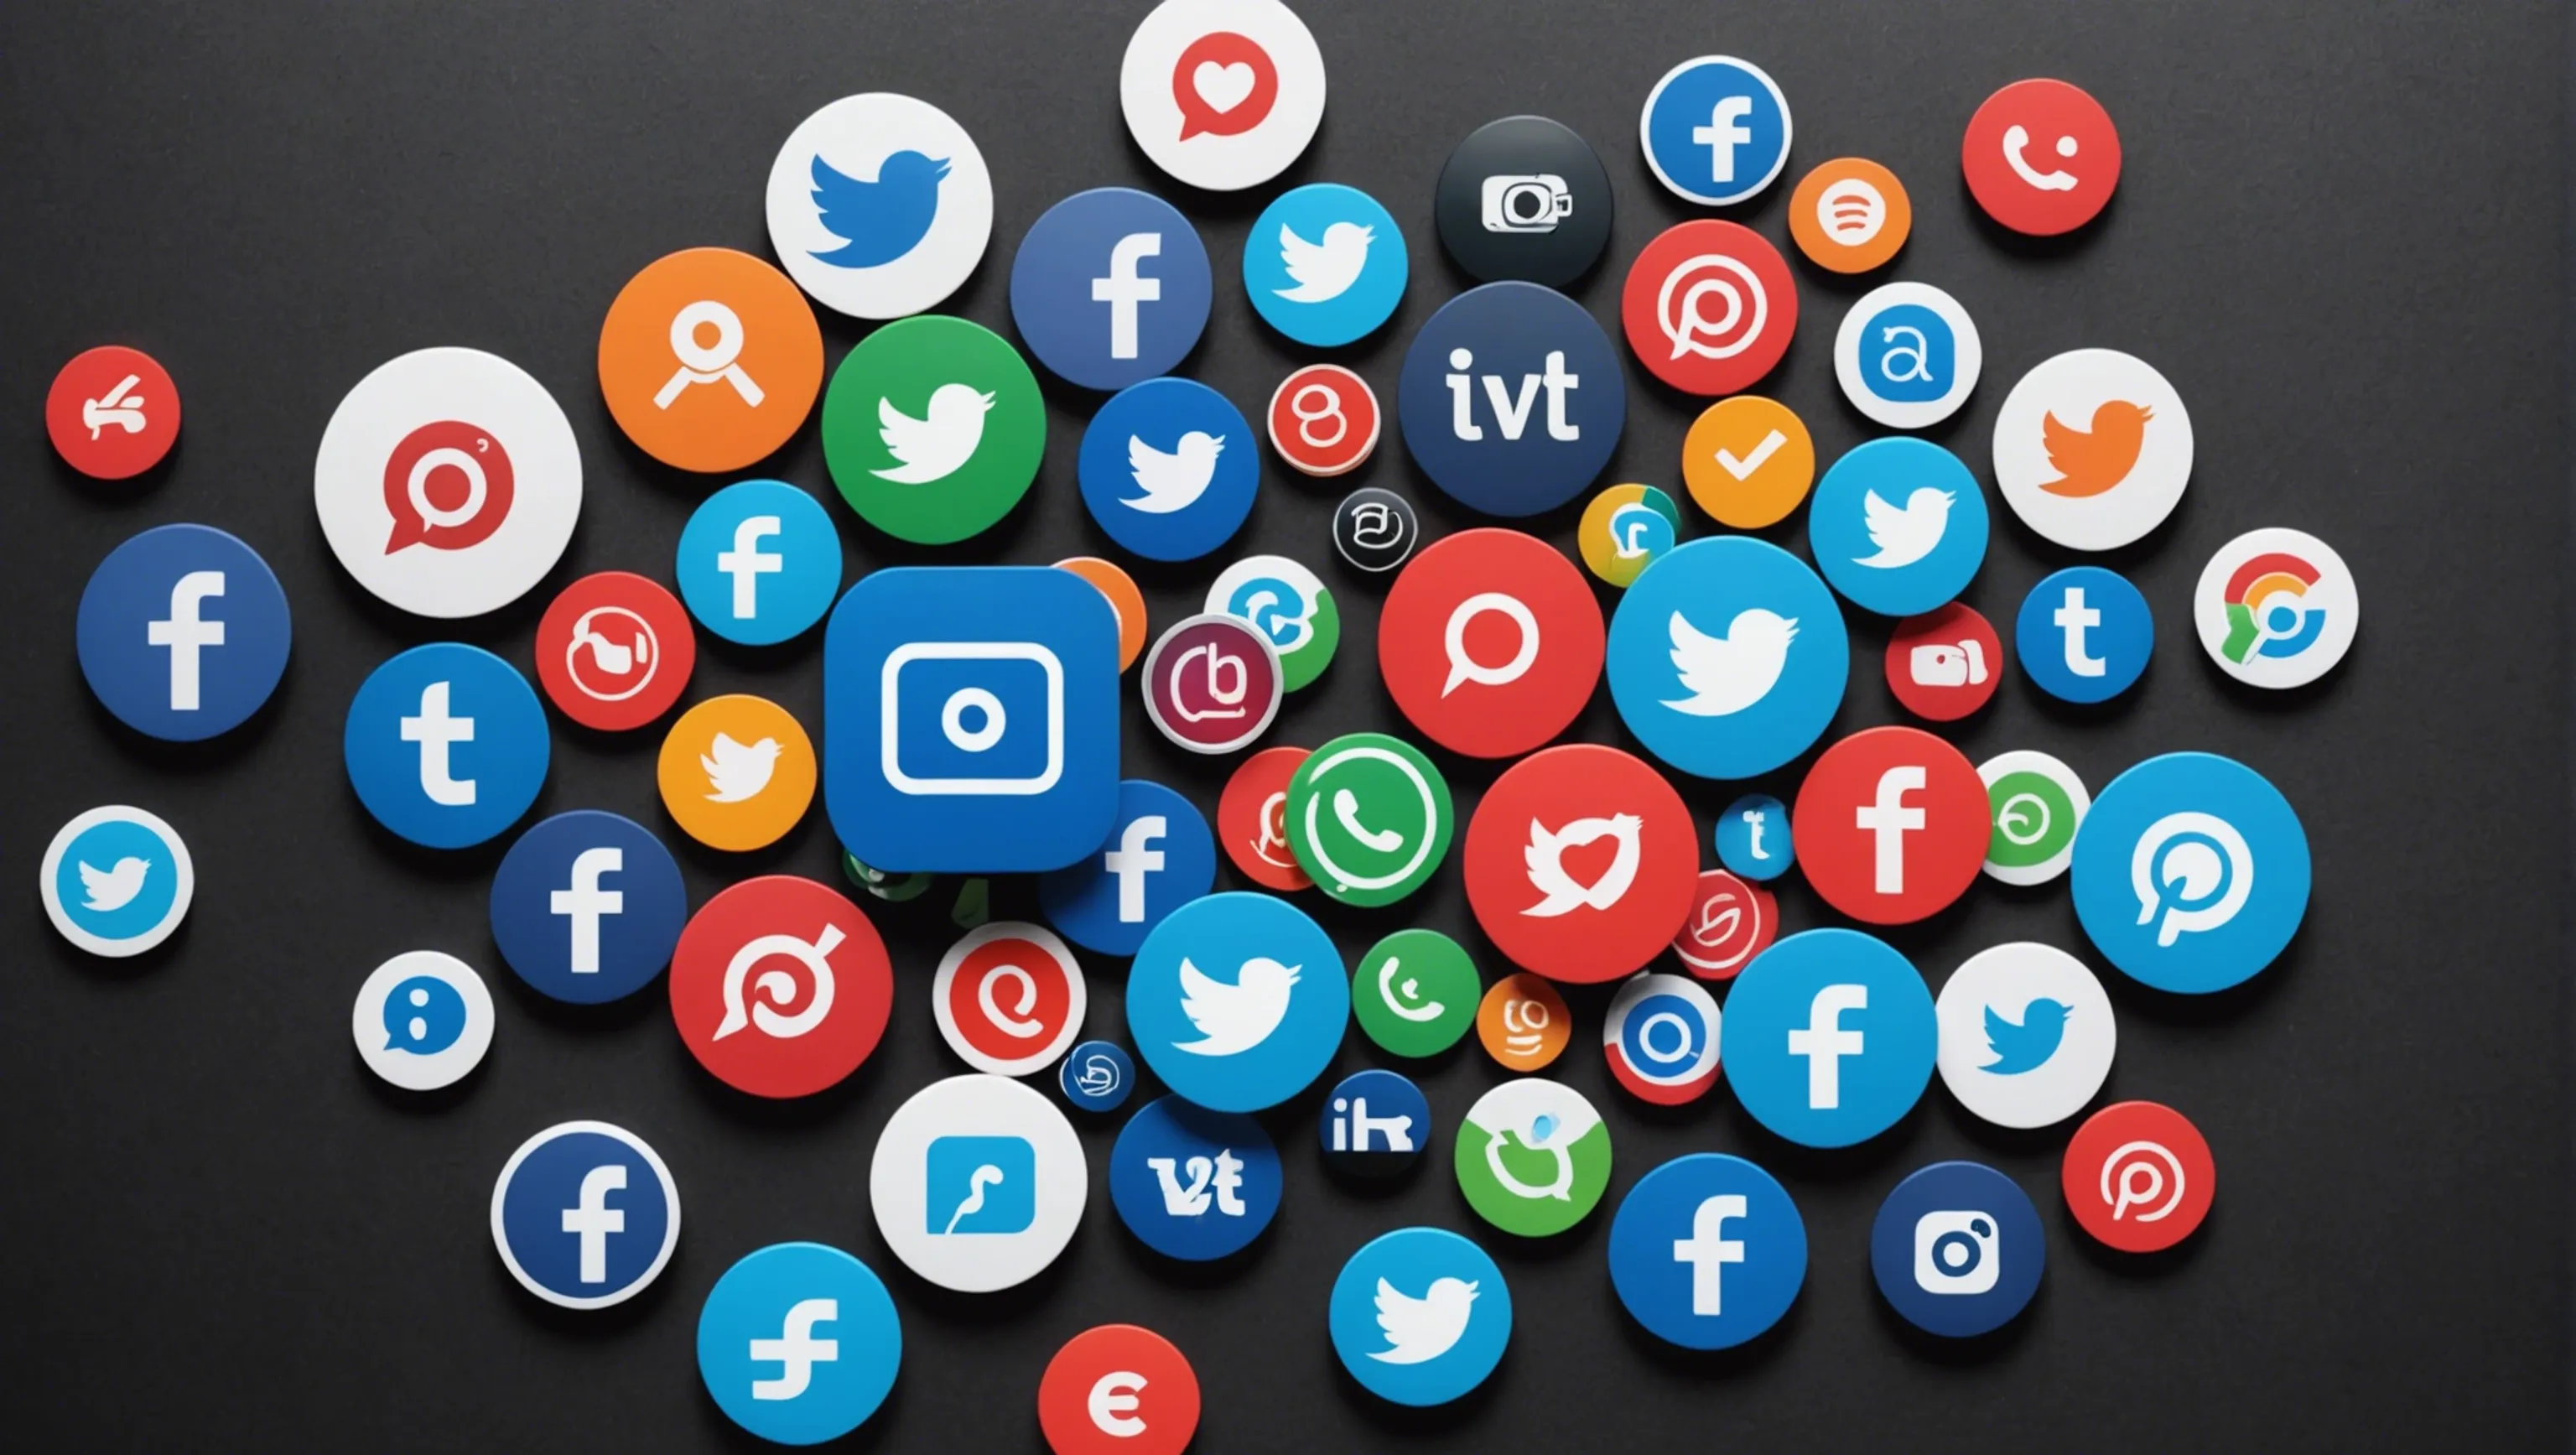 Importance of social media sharing buttons for marketing professionals